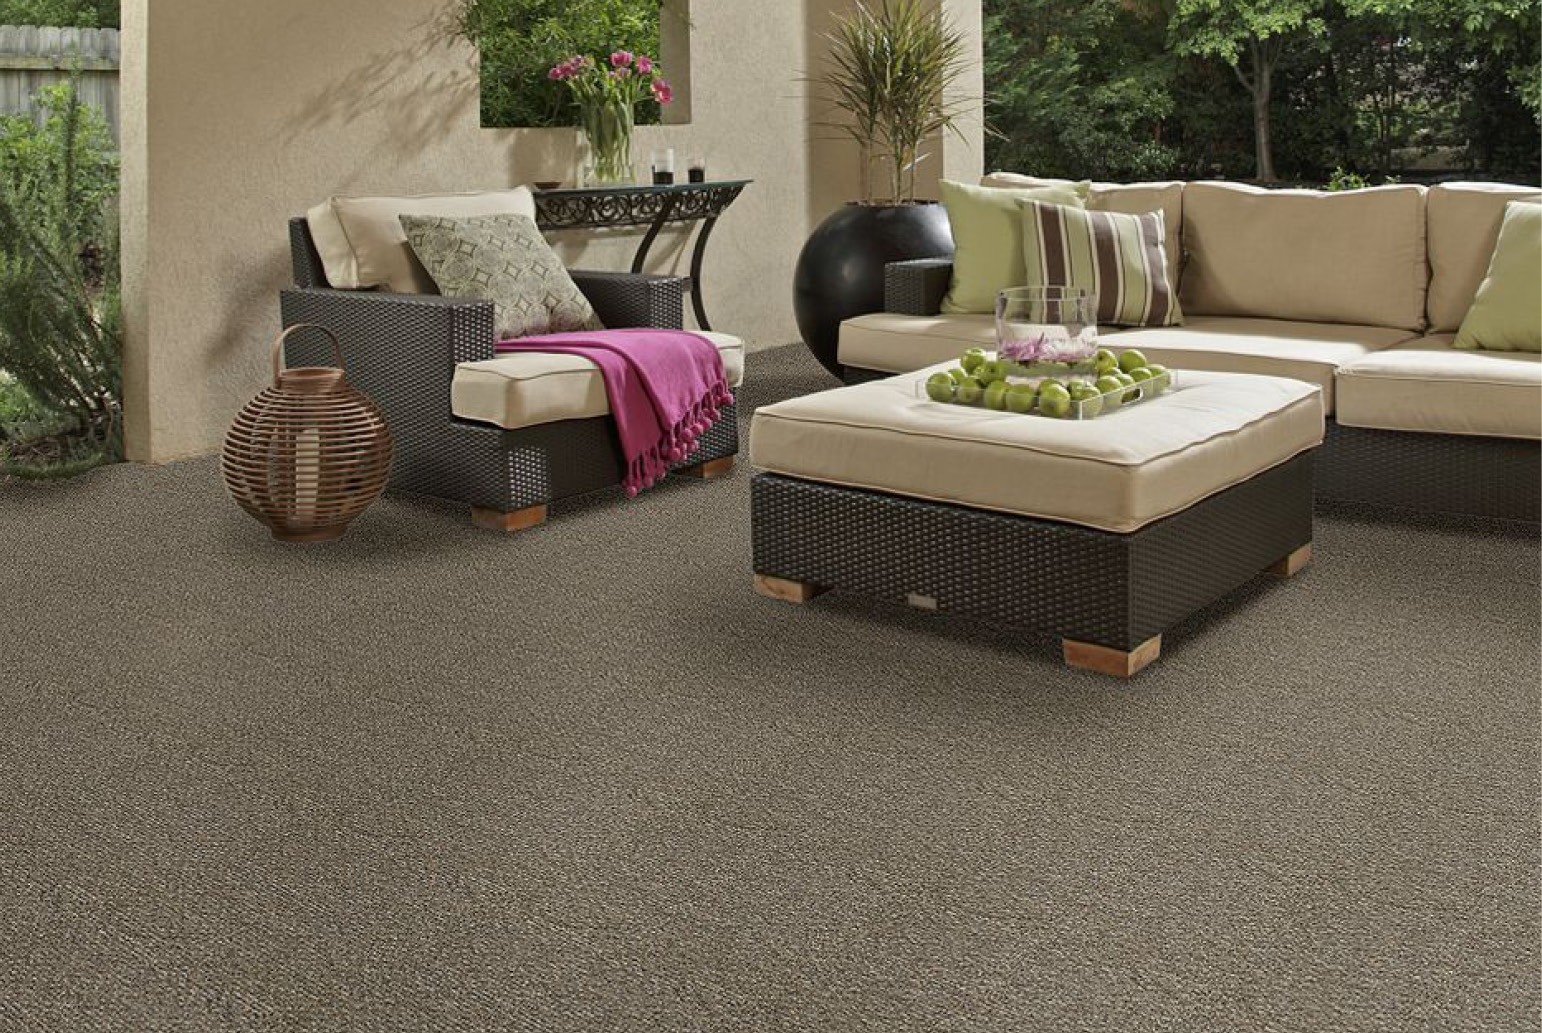 Outdoor carpets will complement tour deck or patio